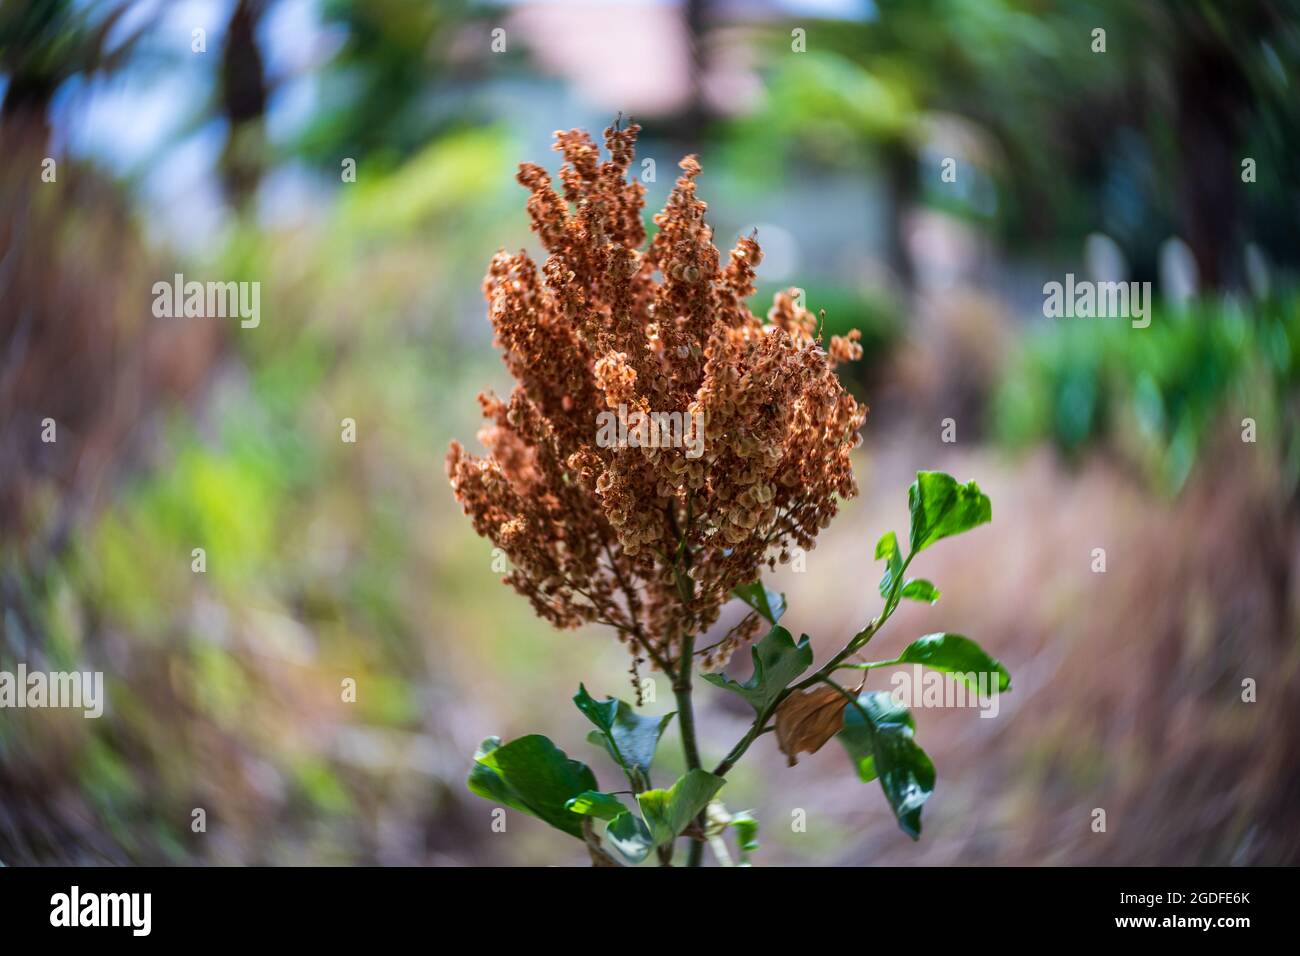 Dry fruits of Rumex lunaria, species of flowering plant in the family Polygonaceae, native to the Canary Islands. Focus in the center, swirling bokeh Stock Photo